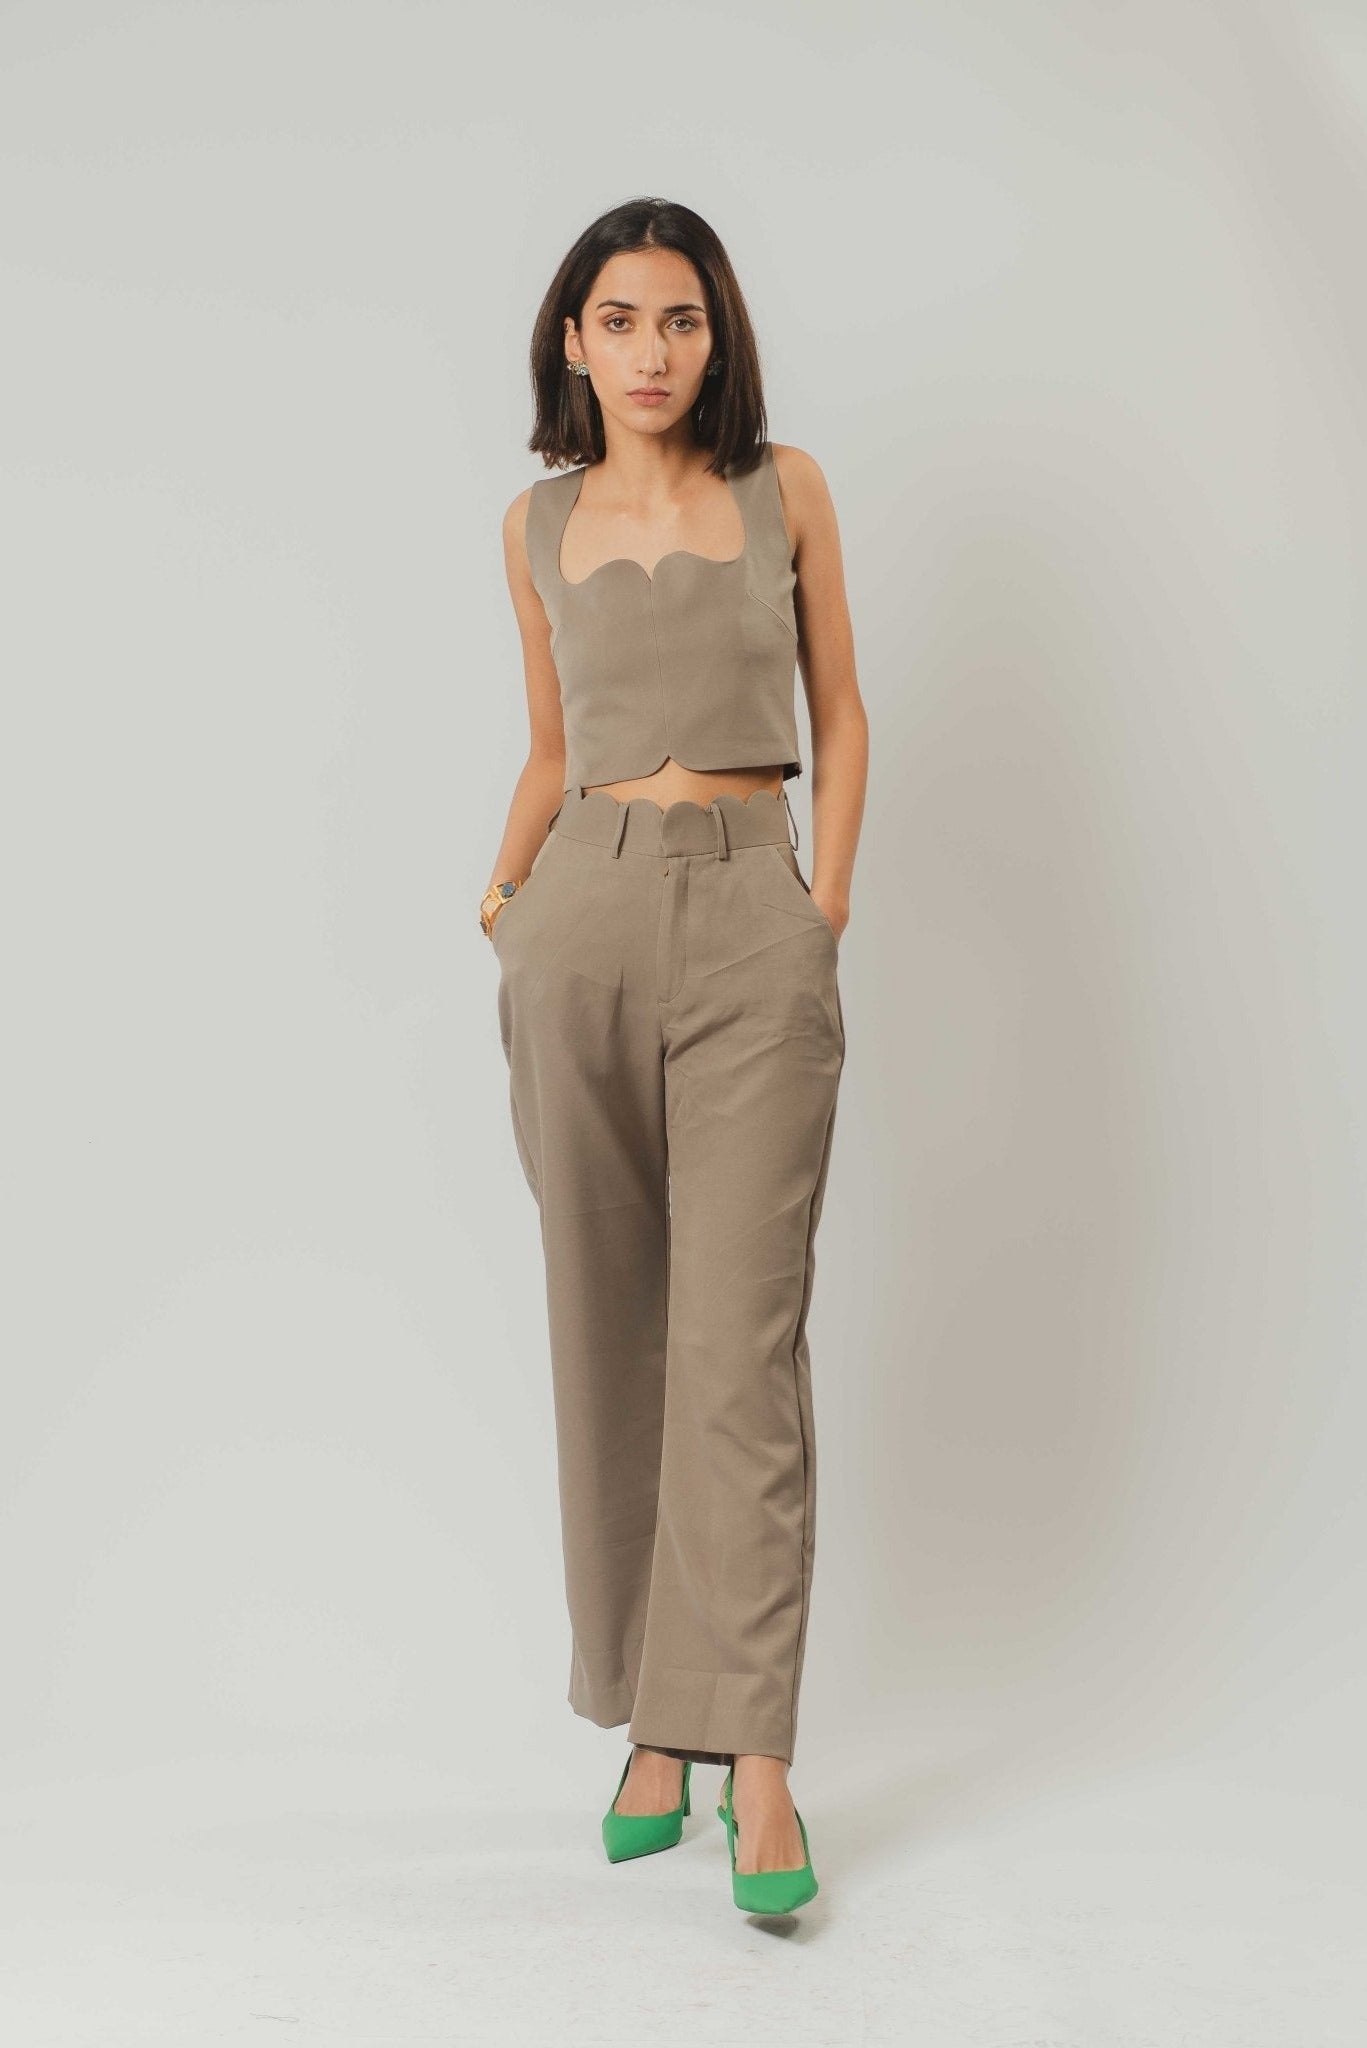 Butter Yellow Appliqué Embroidered Cropped Top With Trousers  Jasmine Bains